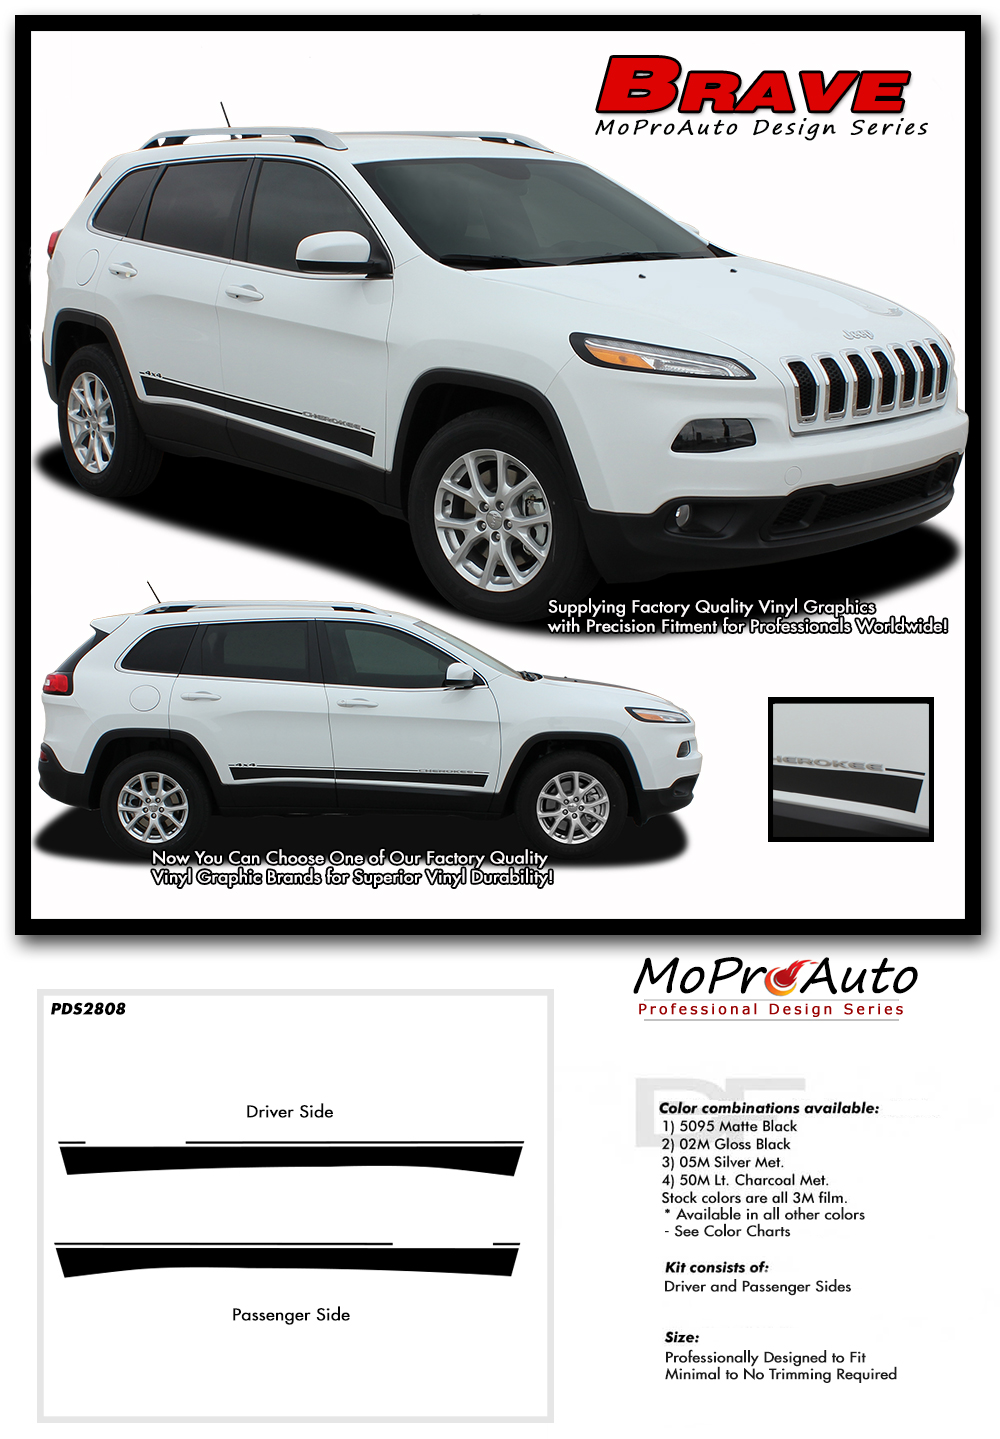 2013, 2014, 2015, 2016, 2017, 2018, 2019, 2020, 2021, 2022, 2023 Jeep Cherokee - MoProAuto Pro Design Series Vinyl Graphics, Stripes and Decals Kit